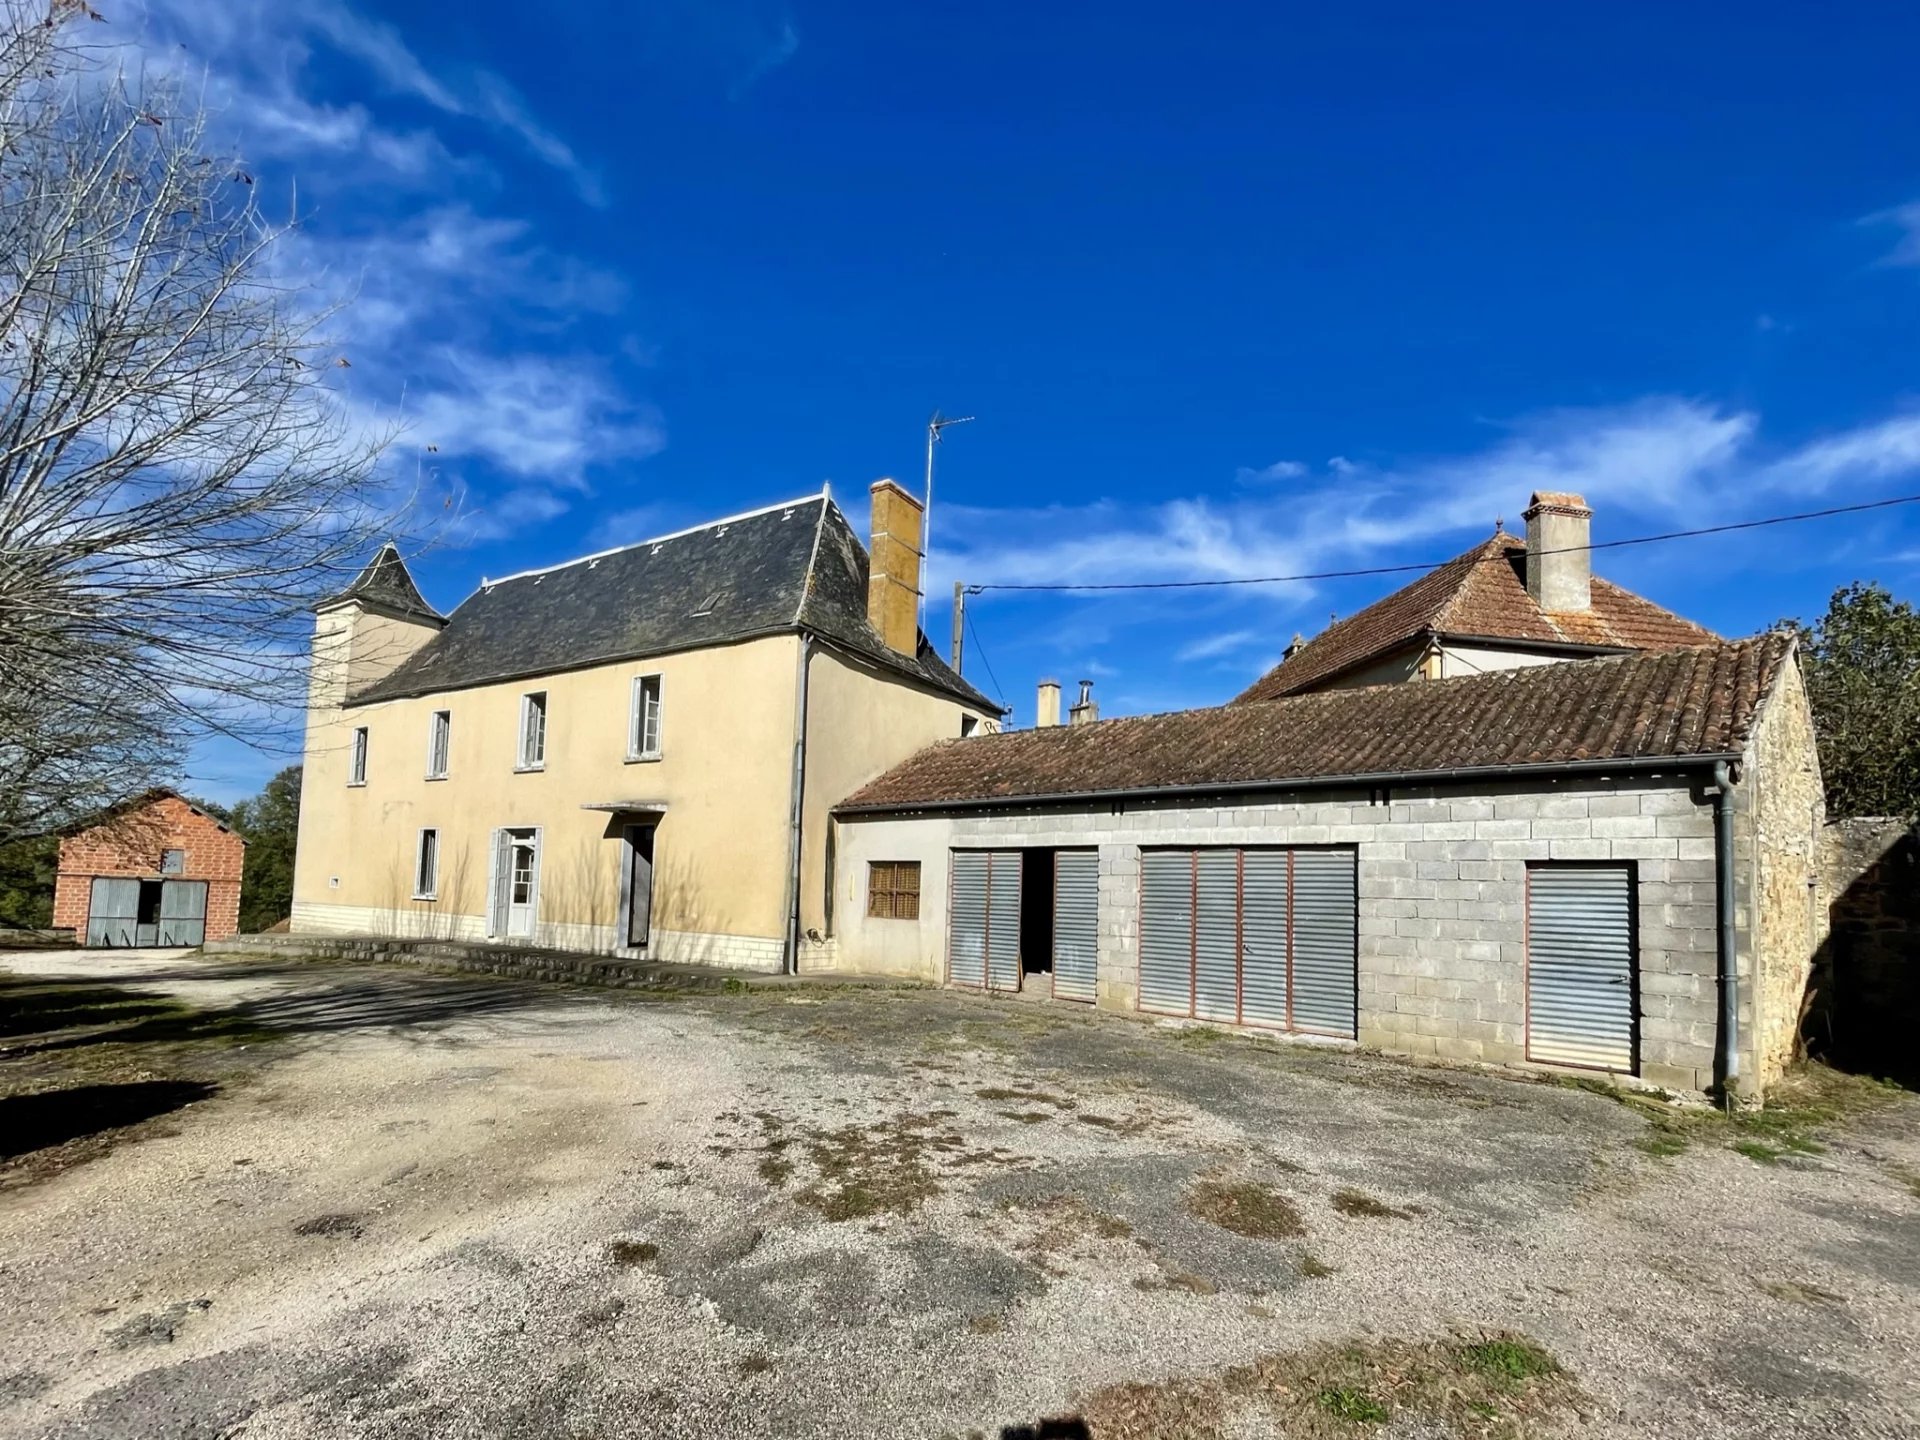 Previously a farm this property has multiple possibilities